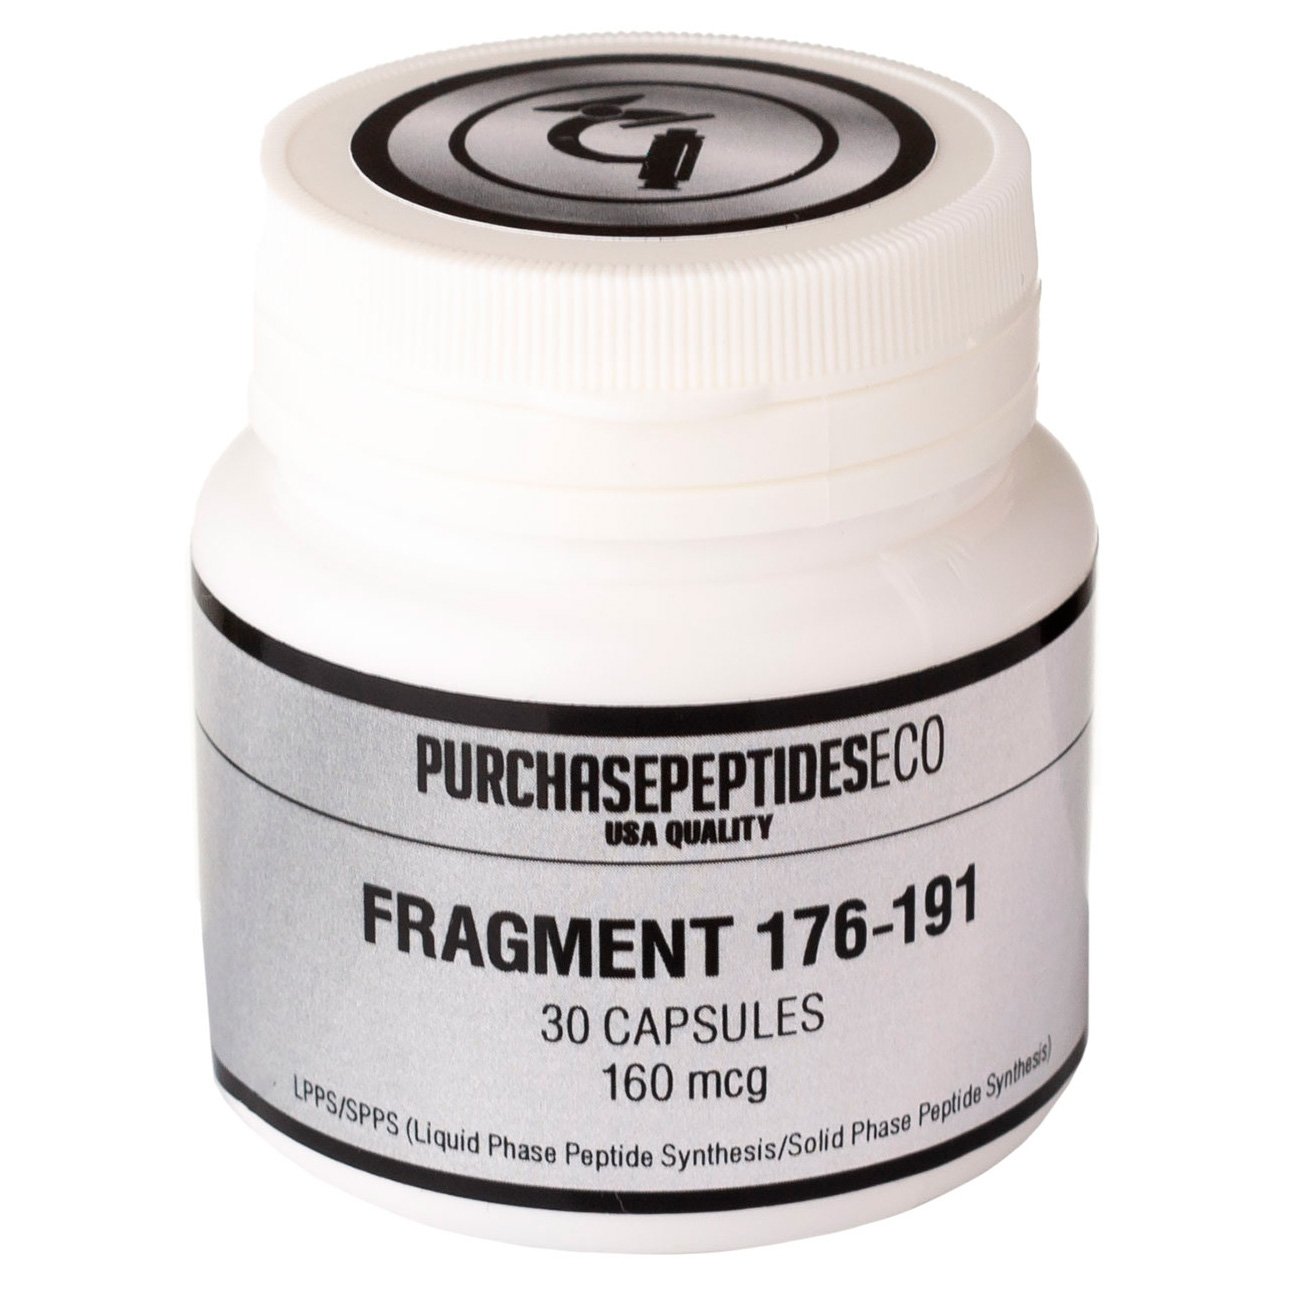 HGH Frag 176-191 капсулы,  мл, PurchasepeptidesEco. Пептиды. 